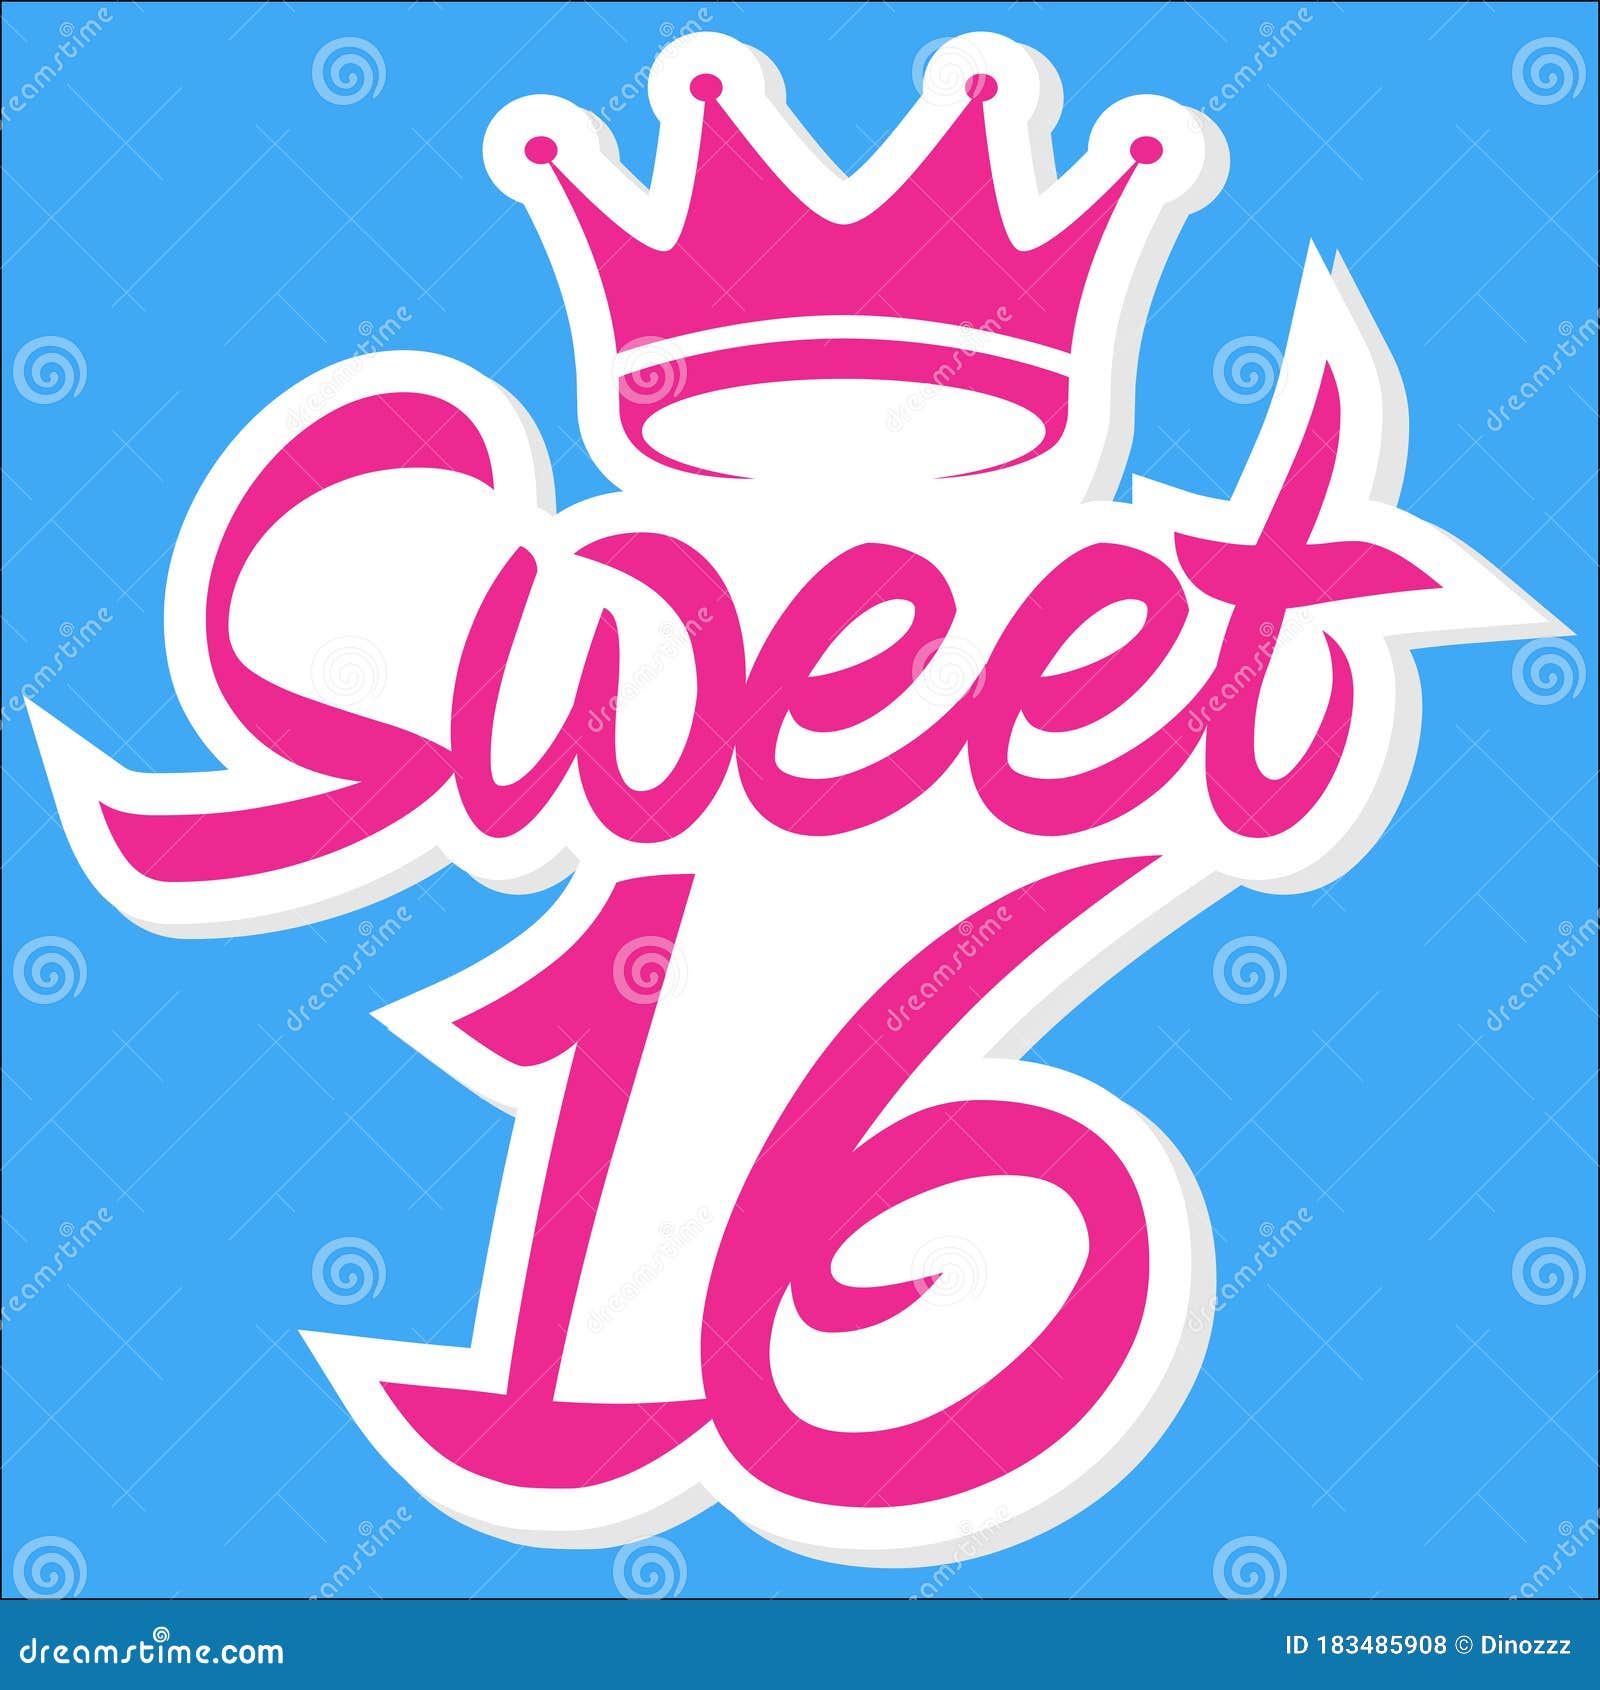 sweet 16 greeting card with crown, celebrating 16th anniversary, 